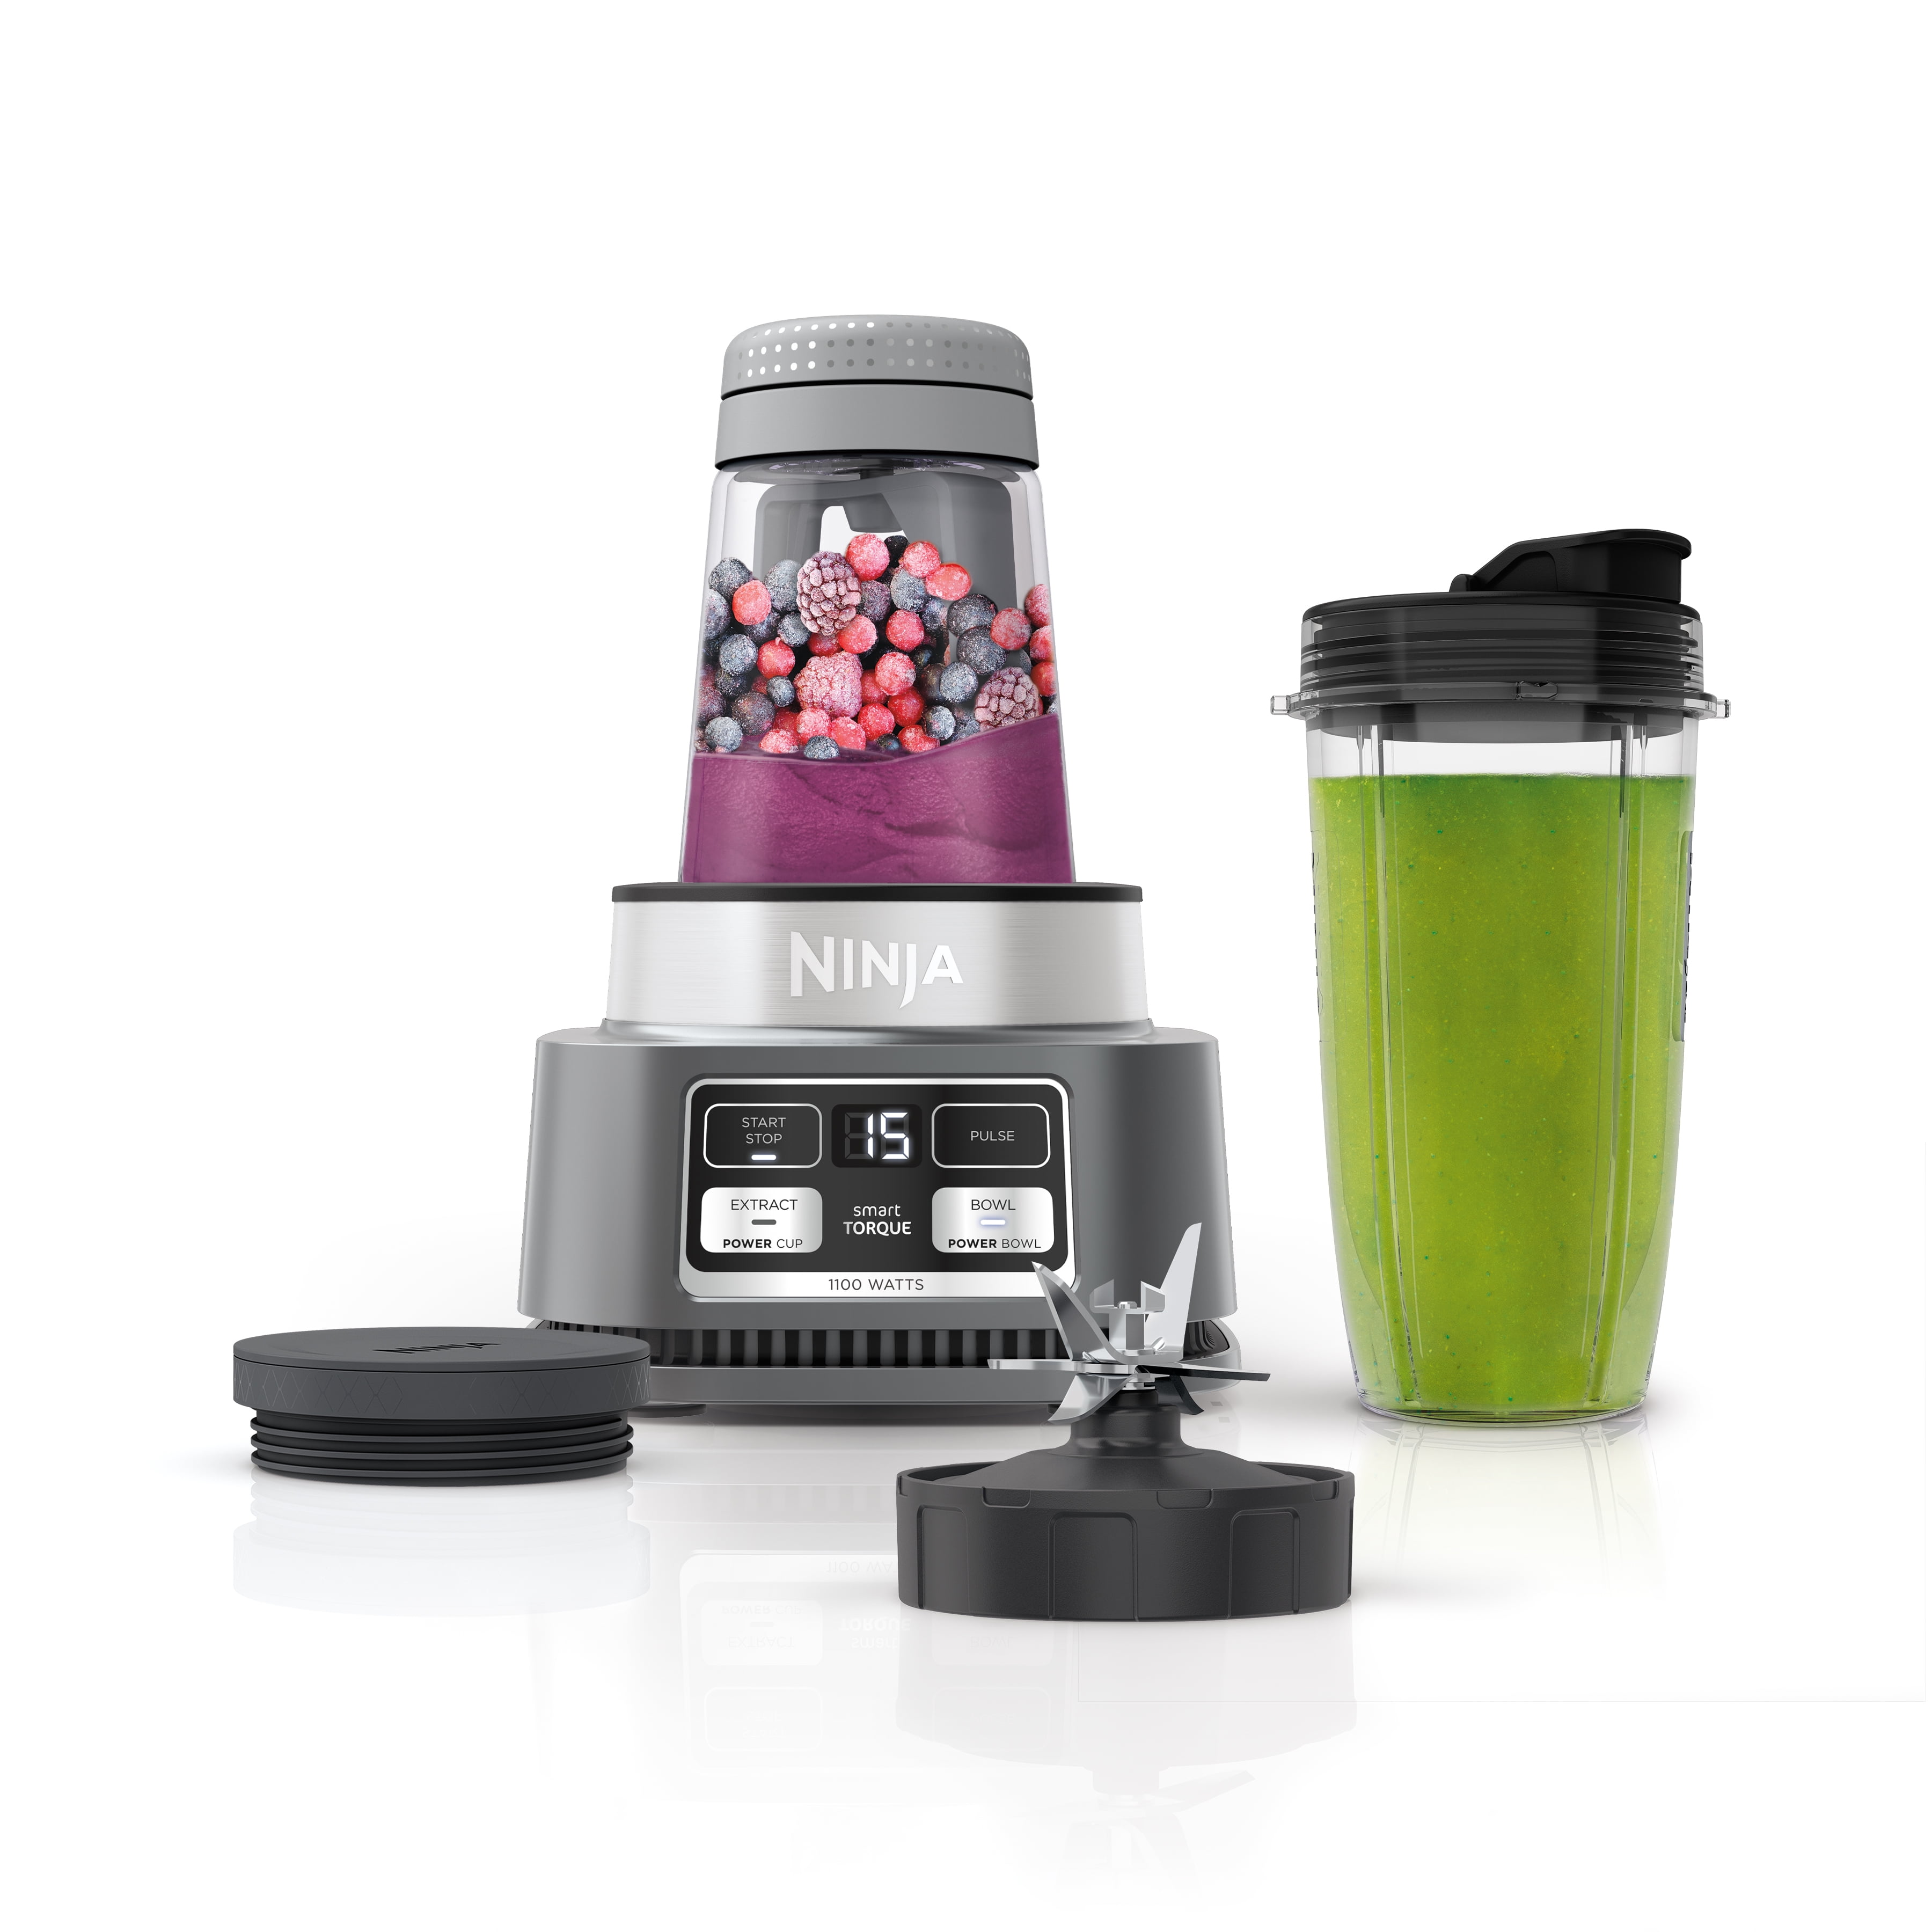 home delivery Annotate Read Ninja® Foodi® Smoothie Bowl Maker and Nutrient Extractor* Blender 1100W  Auto-iQ®, with 24-oz. Nutrient Extraction* Cup, SS100 - Walmart.com